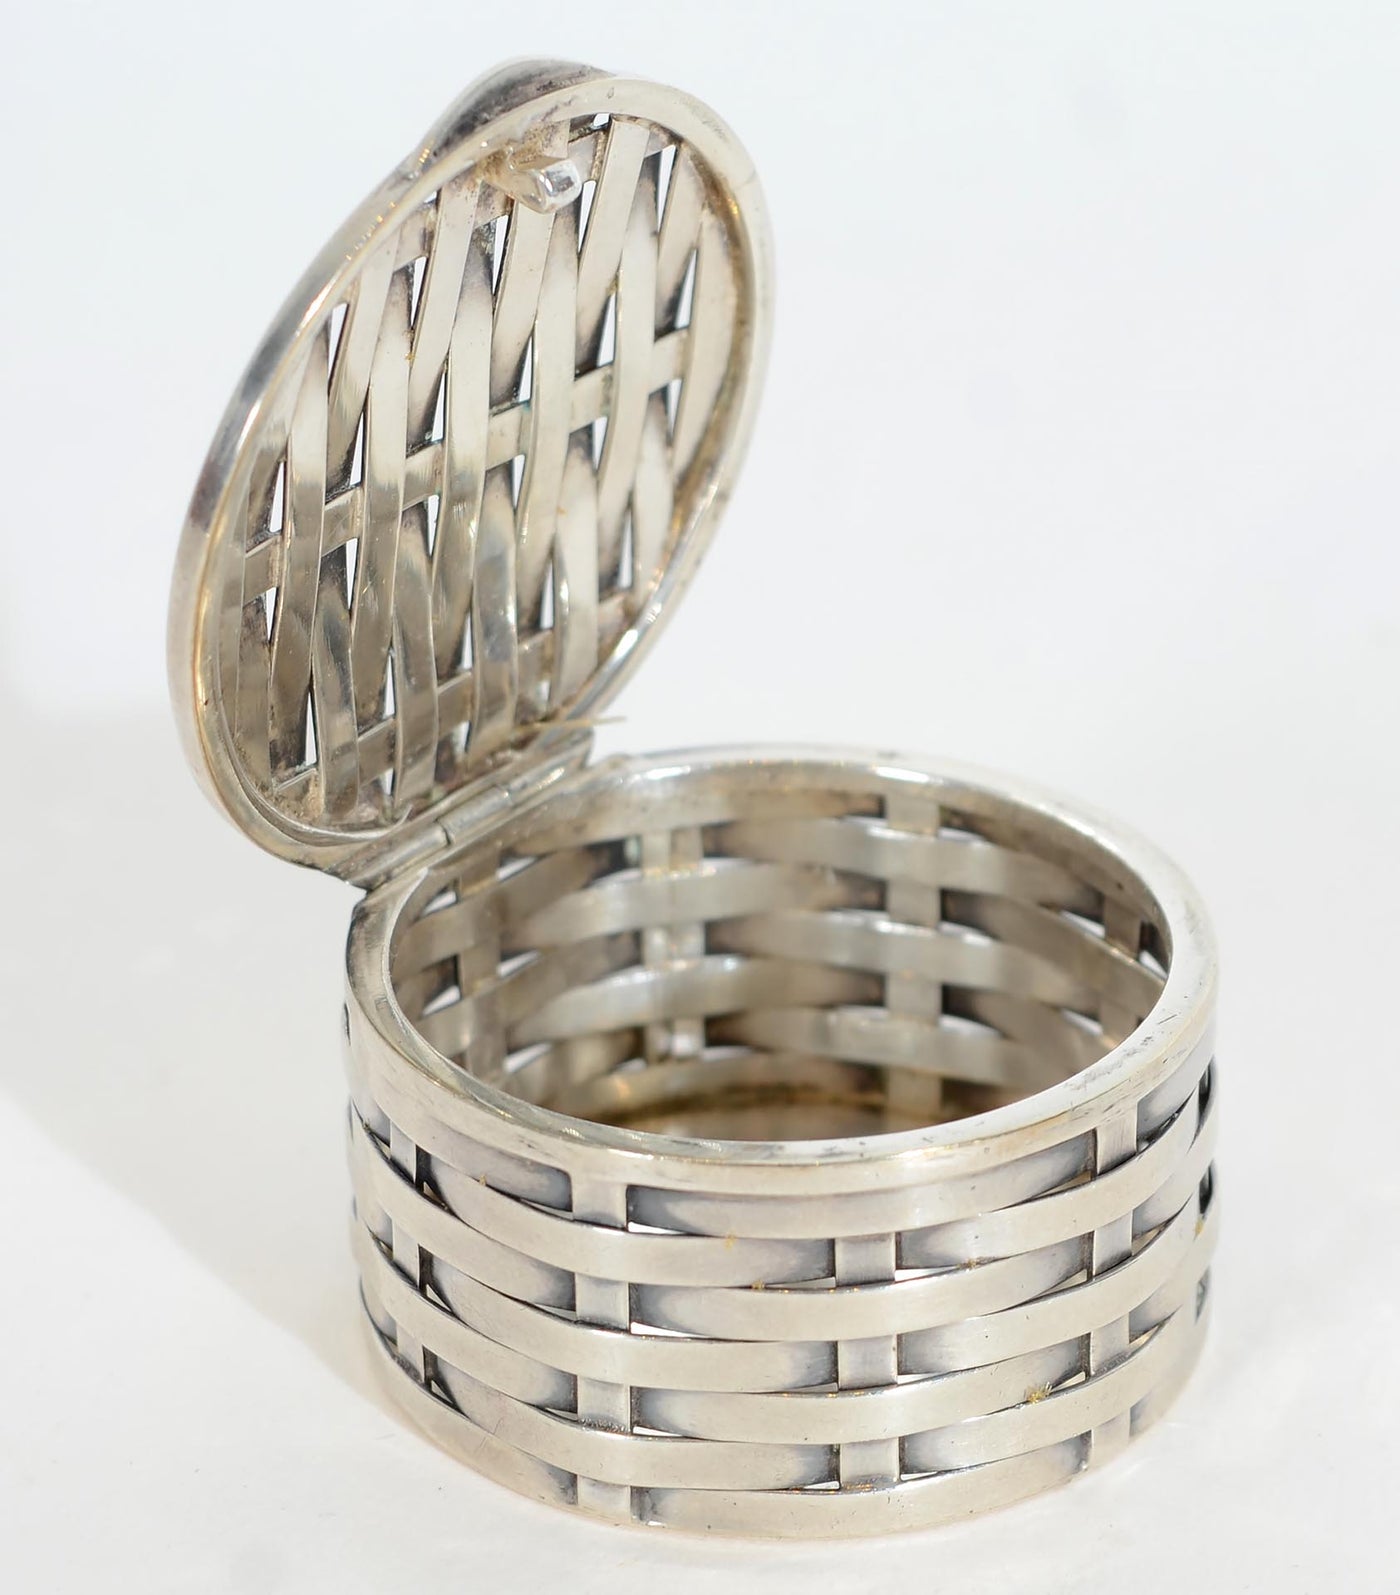 woven-sterling-silver-round-box-1339923-open-lid